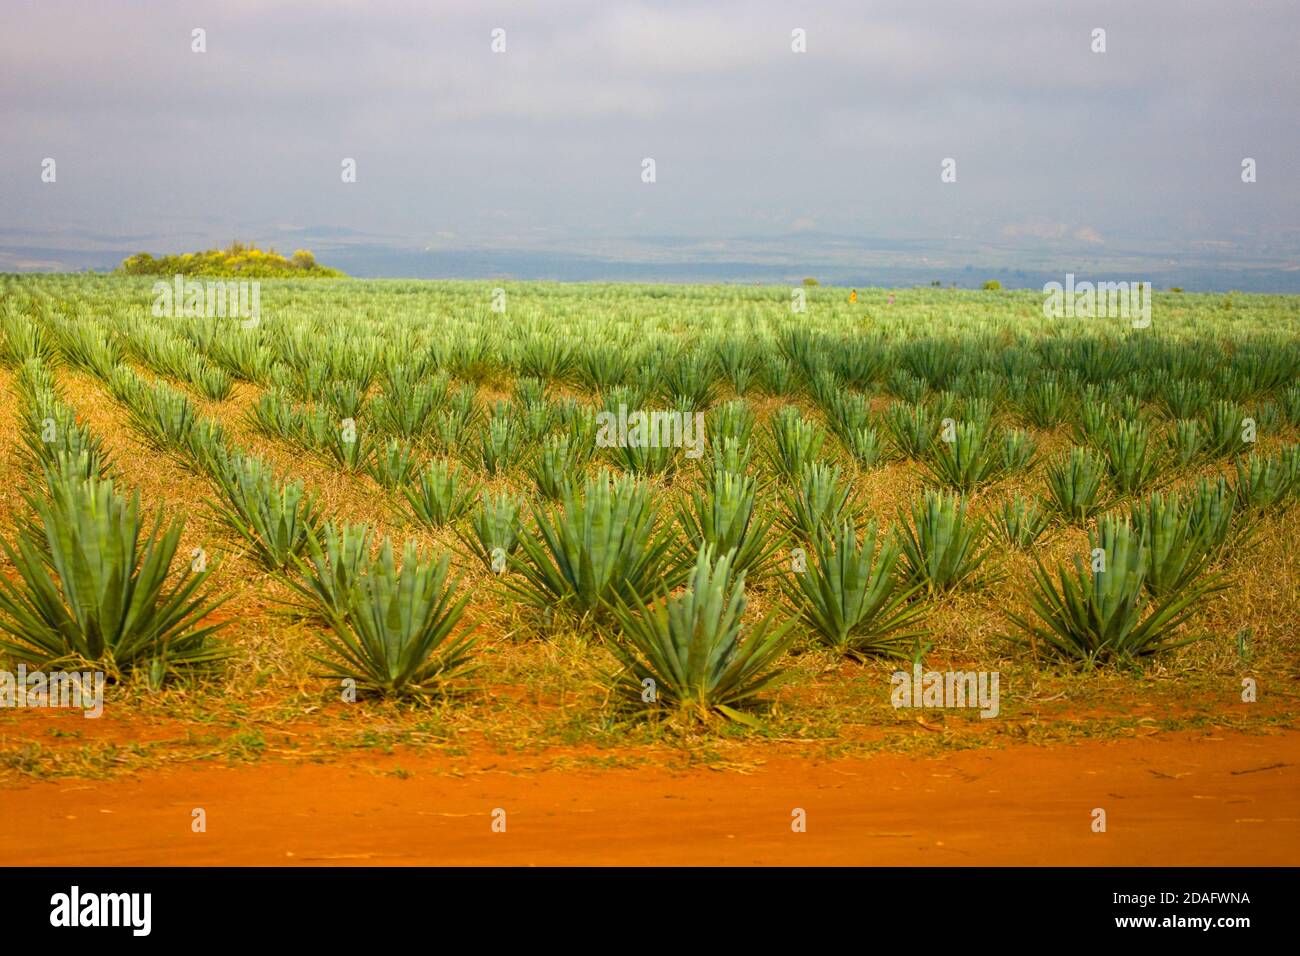 Growing sisal (Agave sisalana) whose fiber can be used to make rope, twine, paper, etc., Fort Dauphin, Madagascar Stock Photo